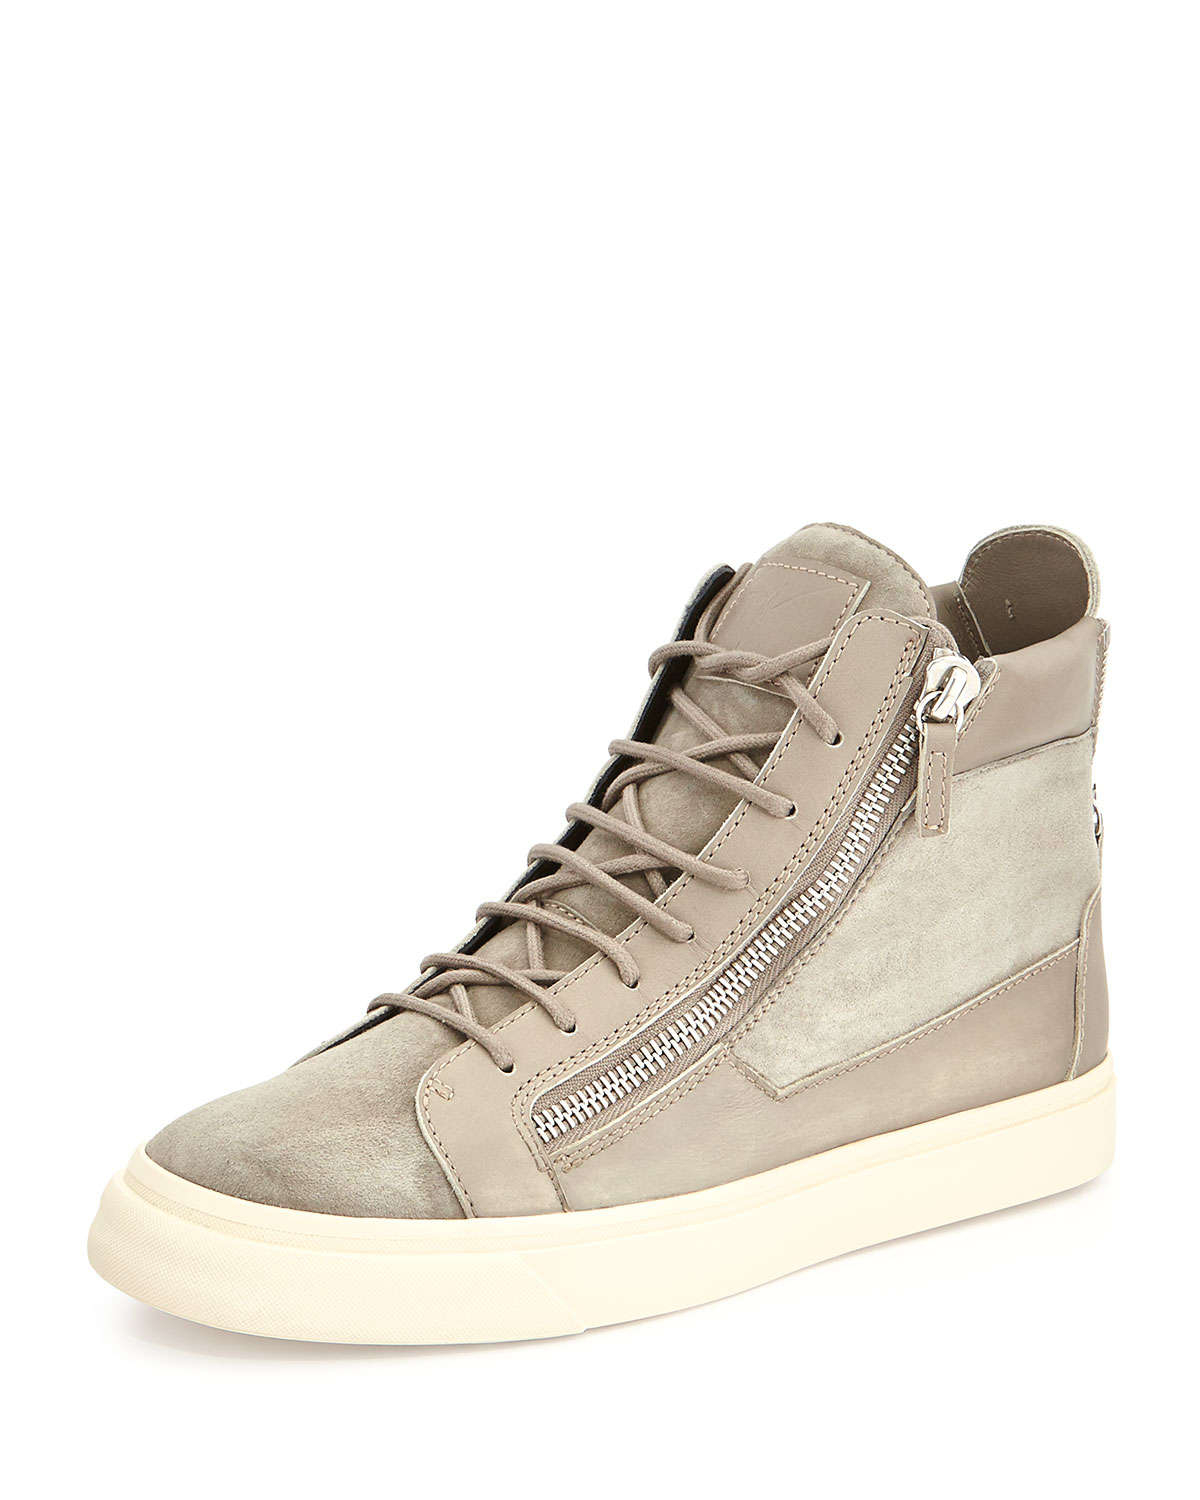 Lyst - Giuseppe Zanotti Suede High-Top Sneakers in Gray for Men